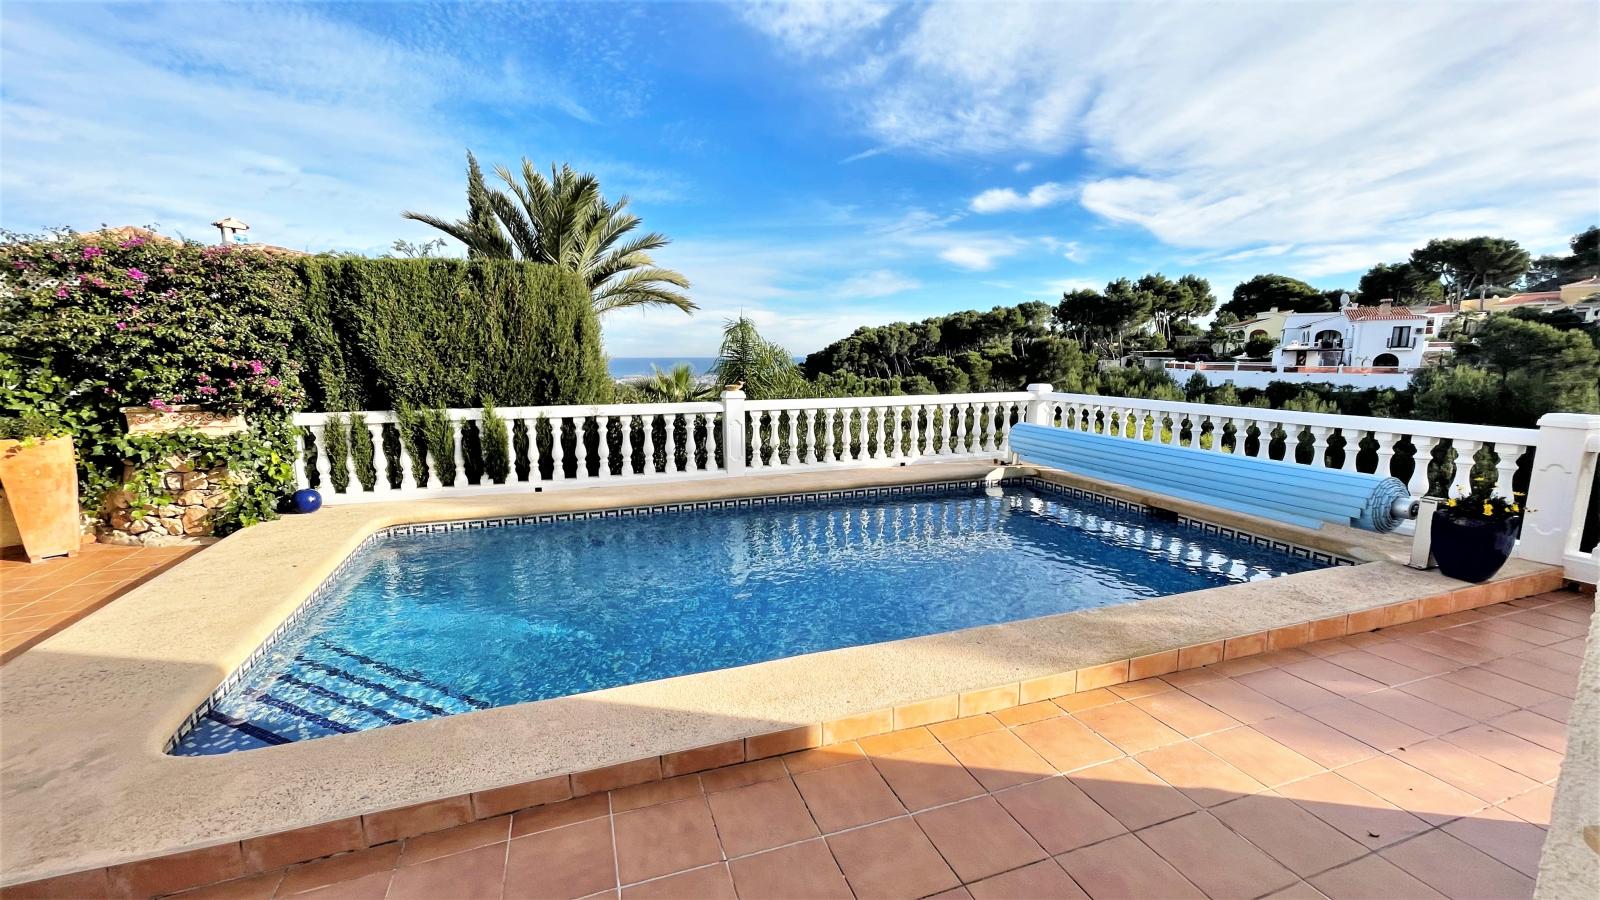 Beautiful villa with sea view in a privileged location, with underfloor heating, pool, carport, winter garden and much more!